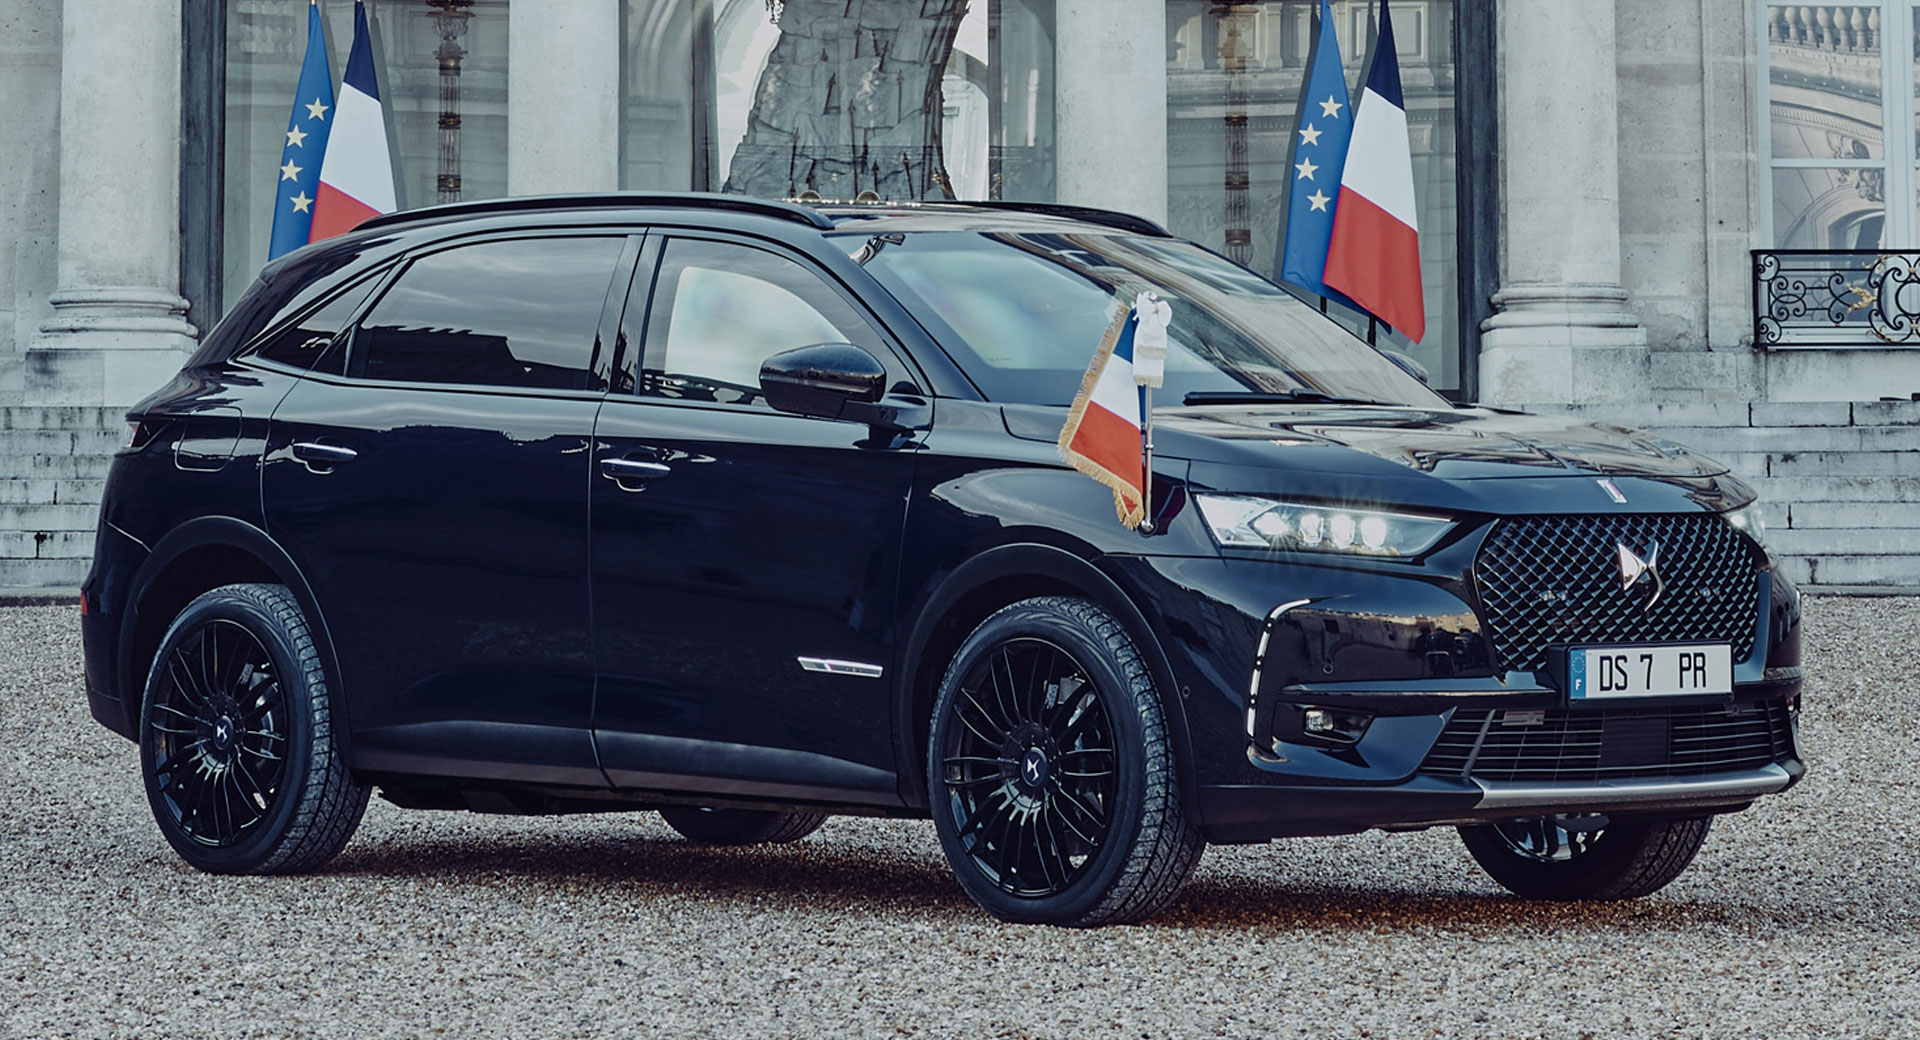 Meet France's New Presidential Ride, The DS 7 Crossback Elysee